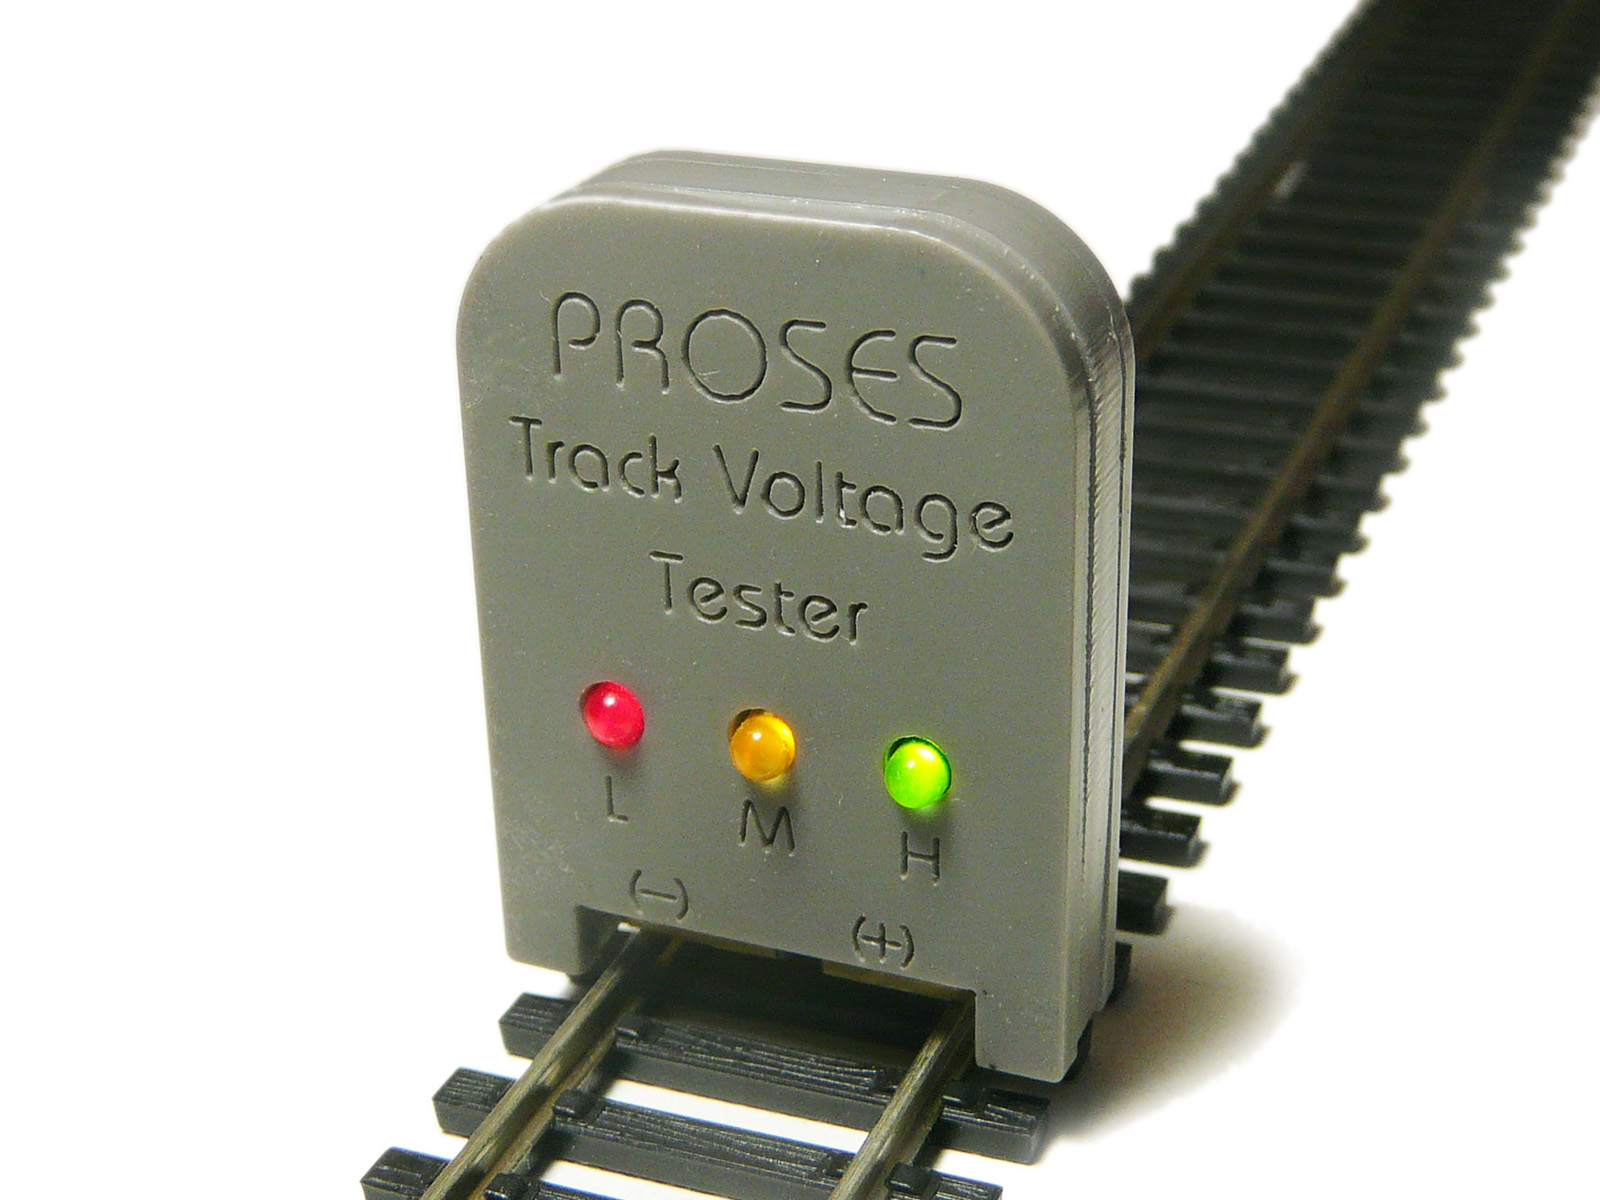 Track Voltage Tester On30/HO/N Scales